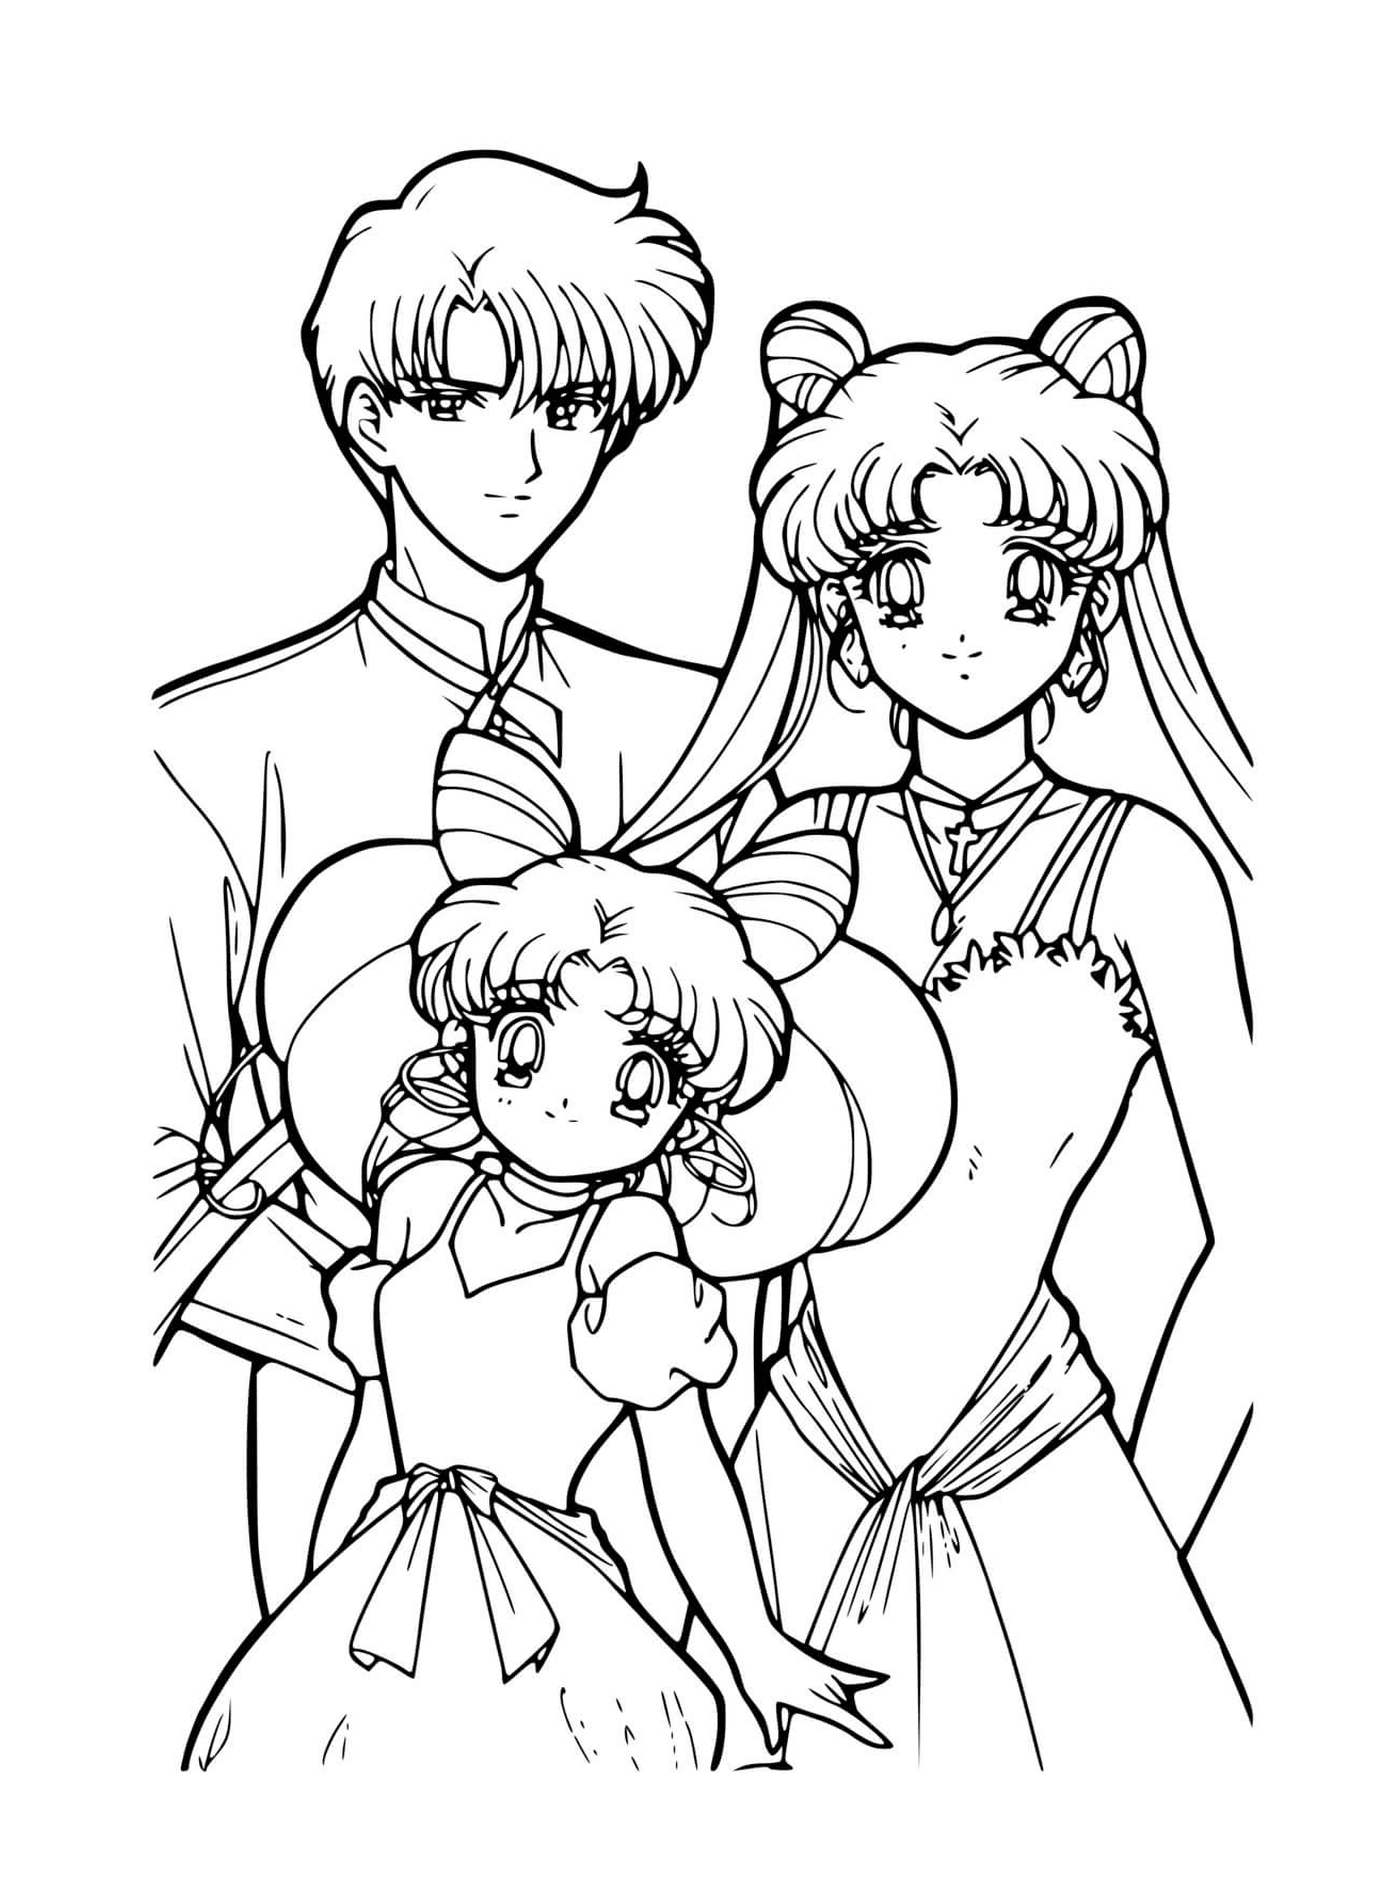  Family time of Sailor Moon 